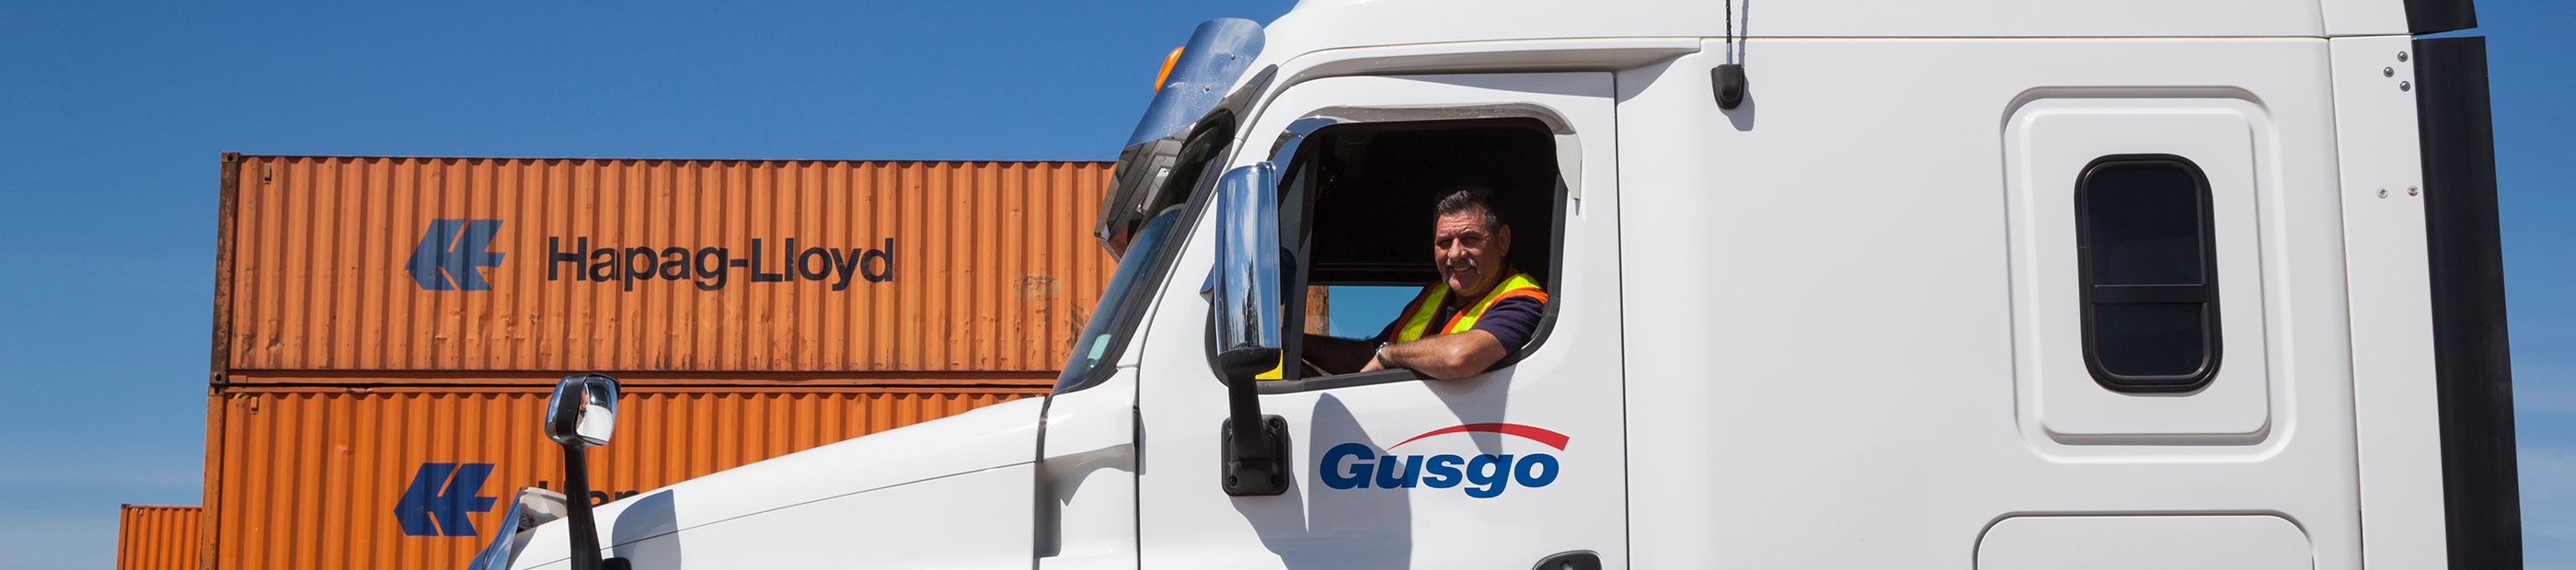 Gusgo Transport truck, containers and driver